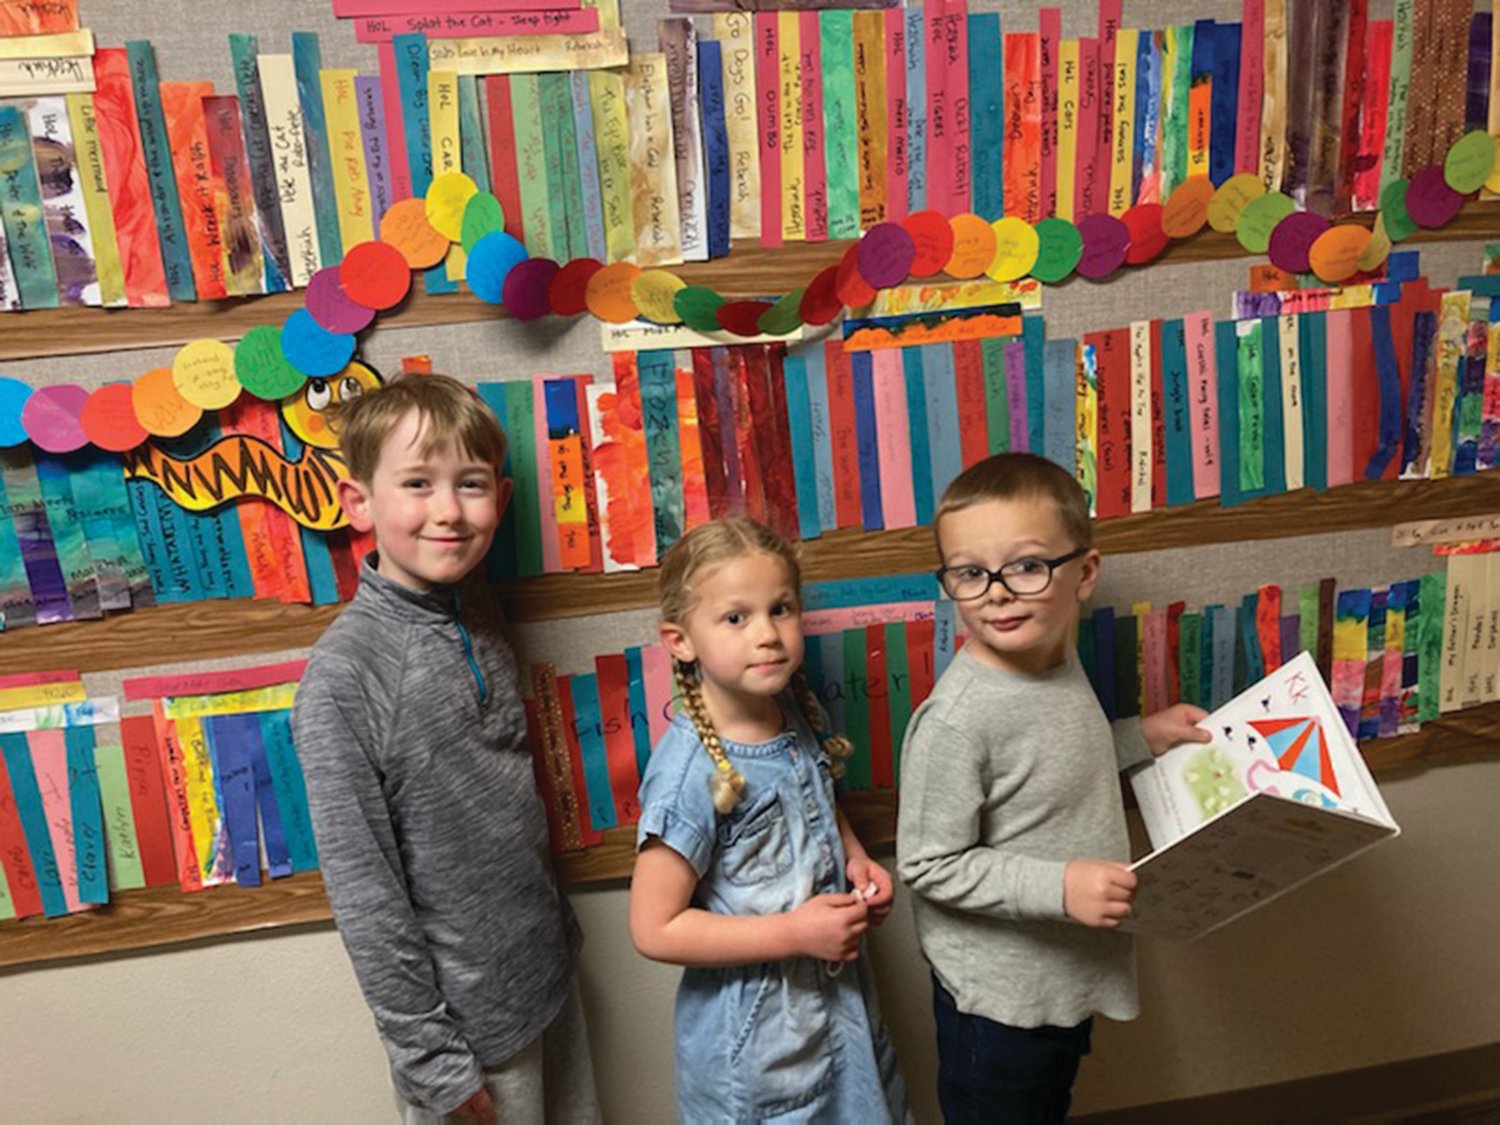 “Top Readers” in Read to Feed this year were first-grader Easton Benedict (Andrew and Hillary of Port Townsend), preschool student Emma Allen (Derek and Eris of Chimacum) and kindergarten student Holland Bare (Travis and Katie of Sequim).